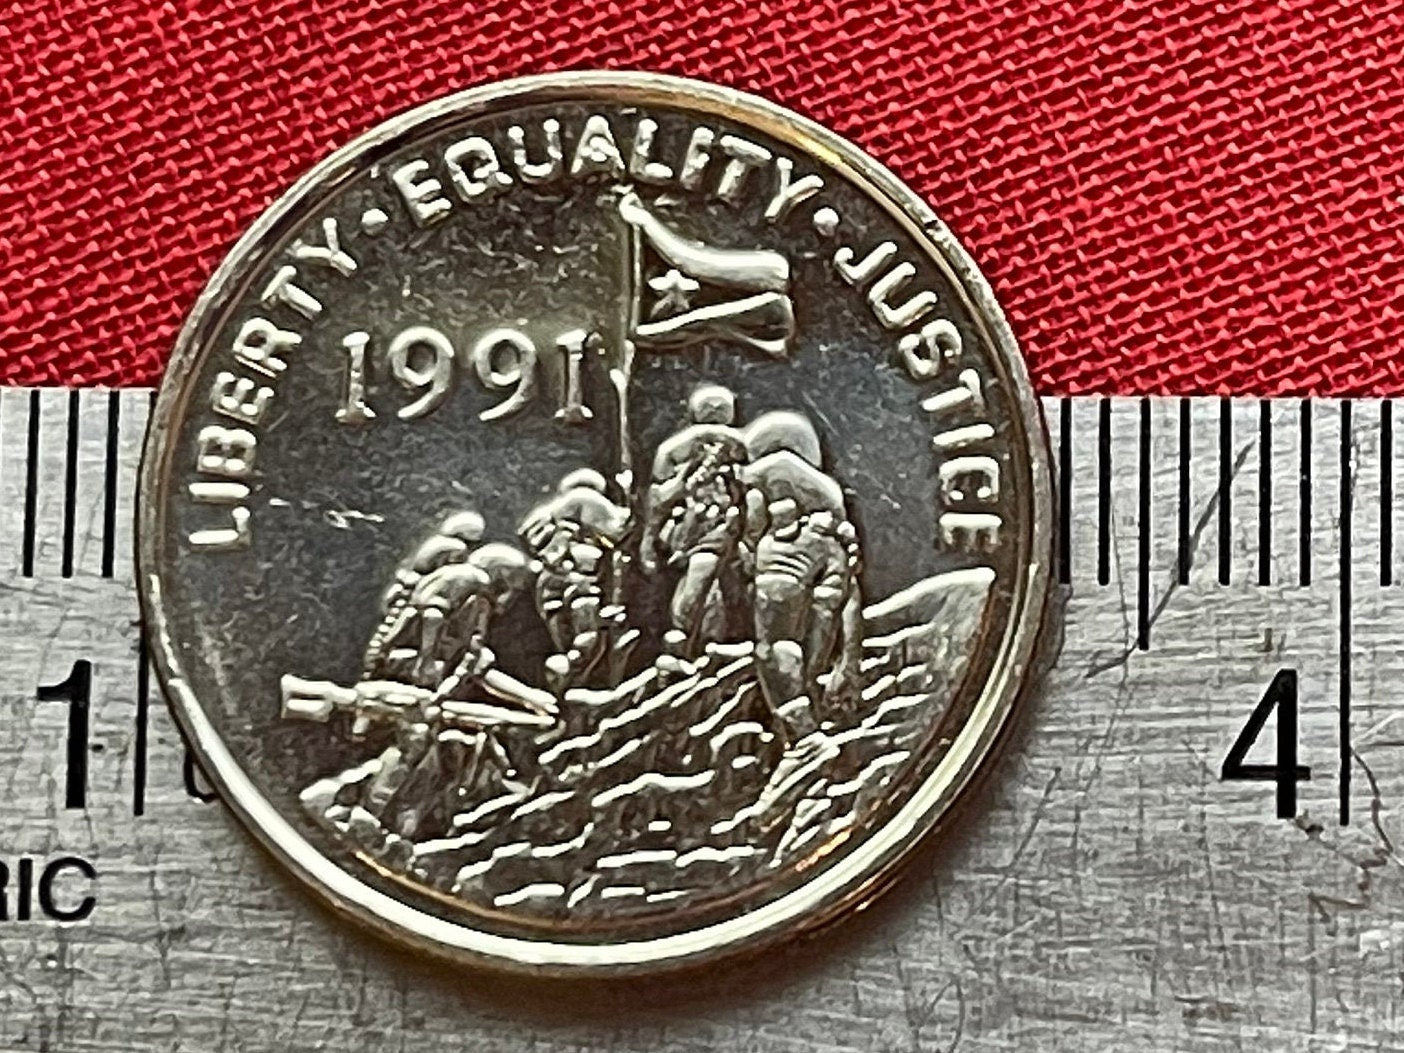 Grévy's Zebra 25 Cents Eritrea Authentic Coin Money for Jewelry and Craft Making (Liberty Equality Justice)